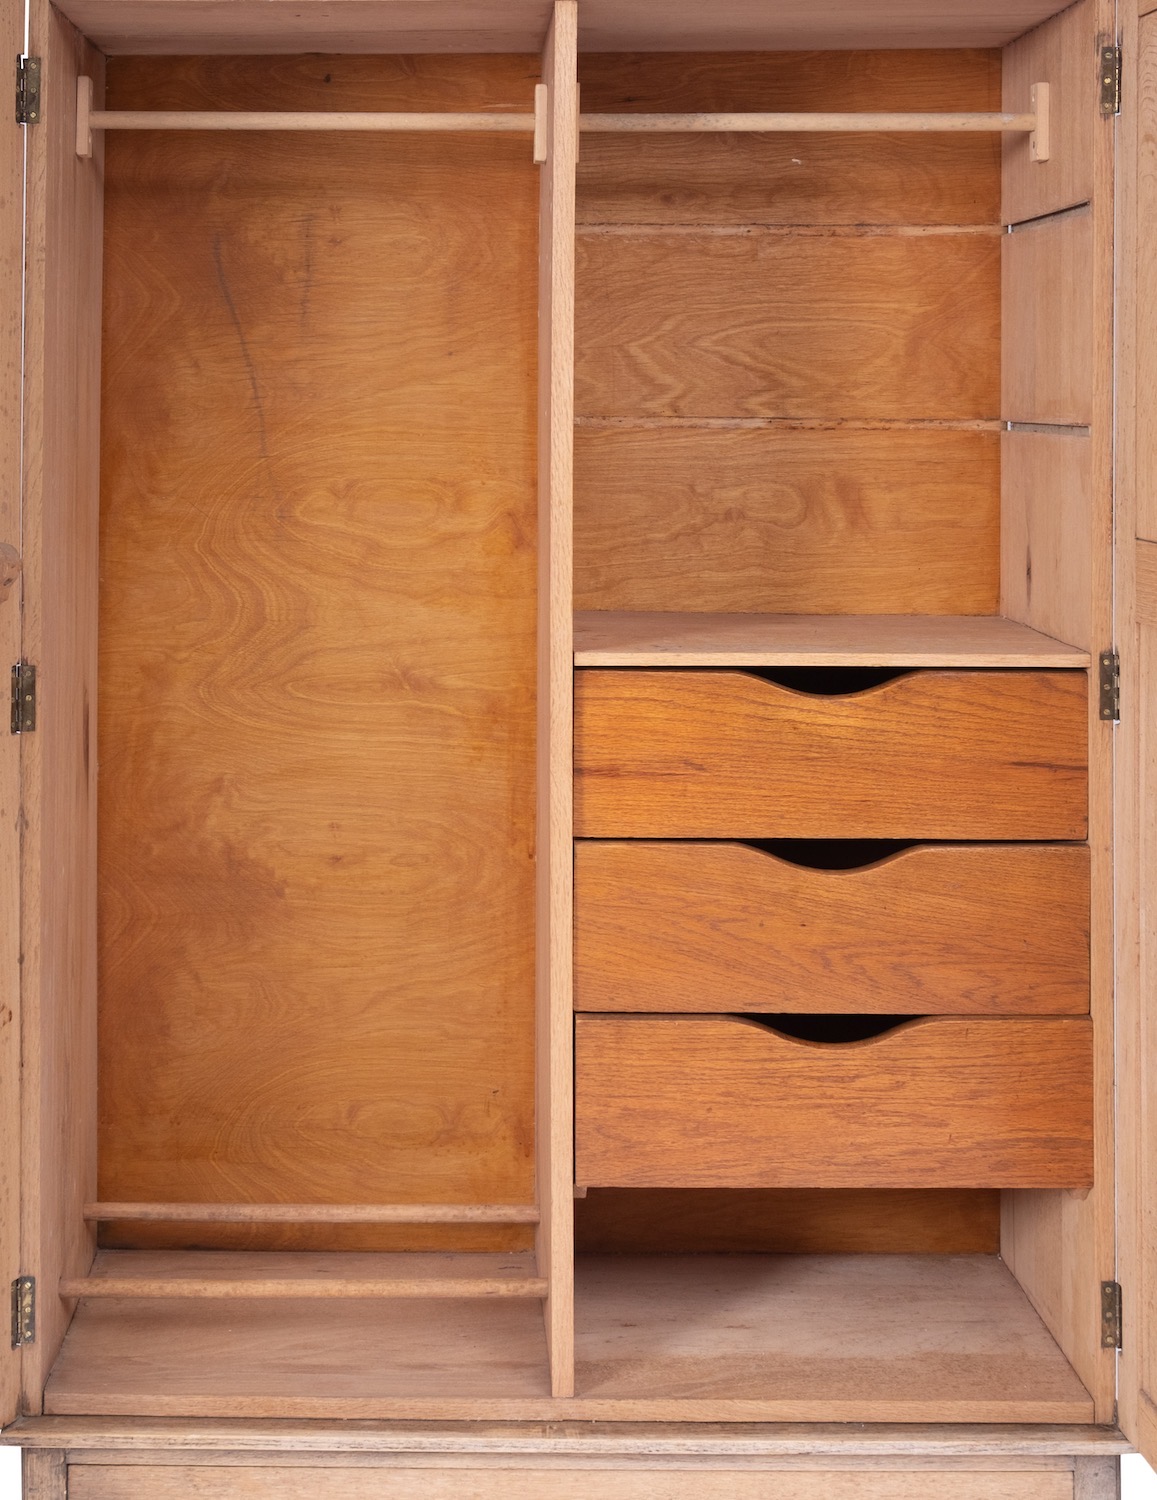 A bleached oak wardrobe in the manner of Heal & Son, - Image 2 of 2